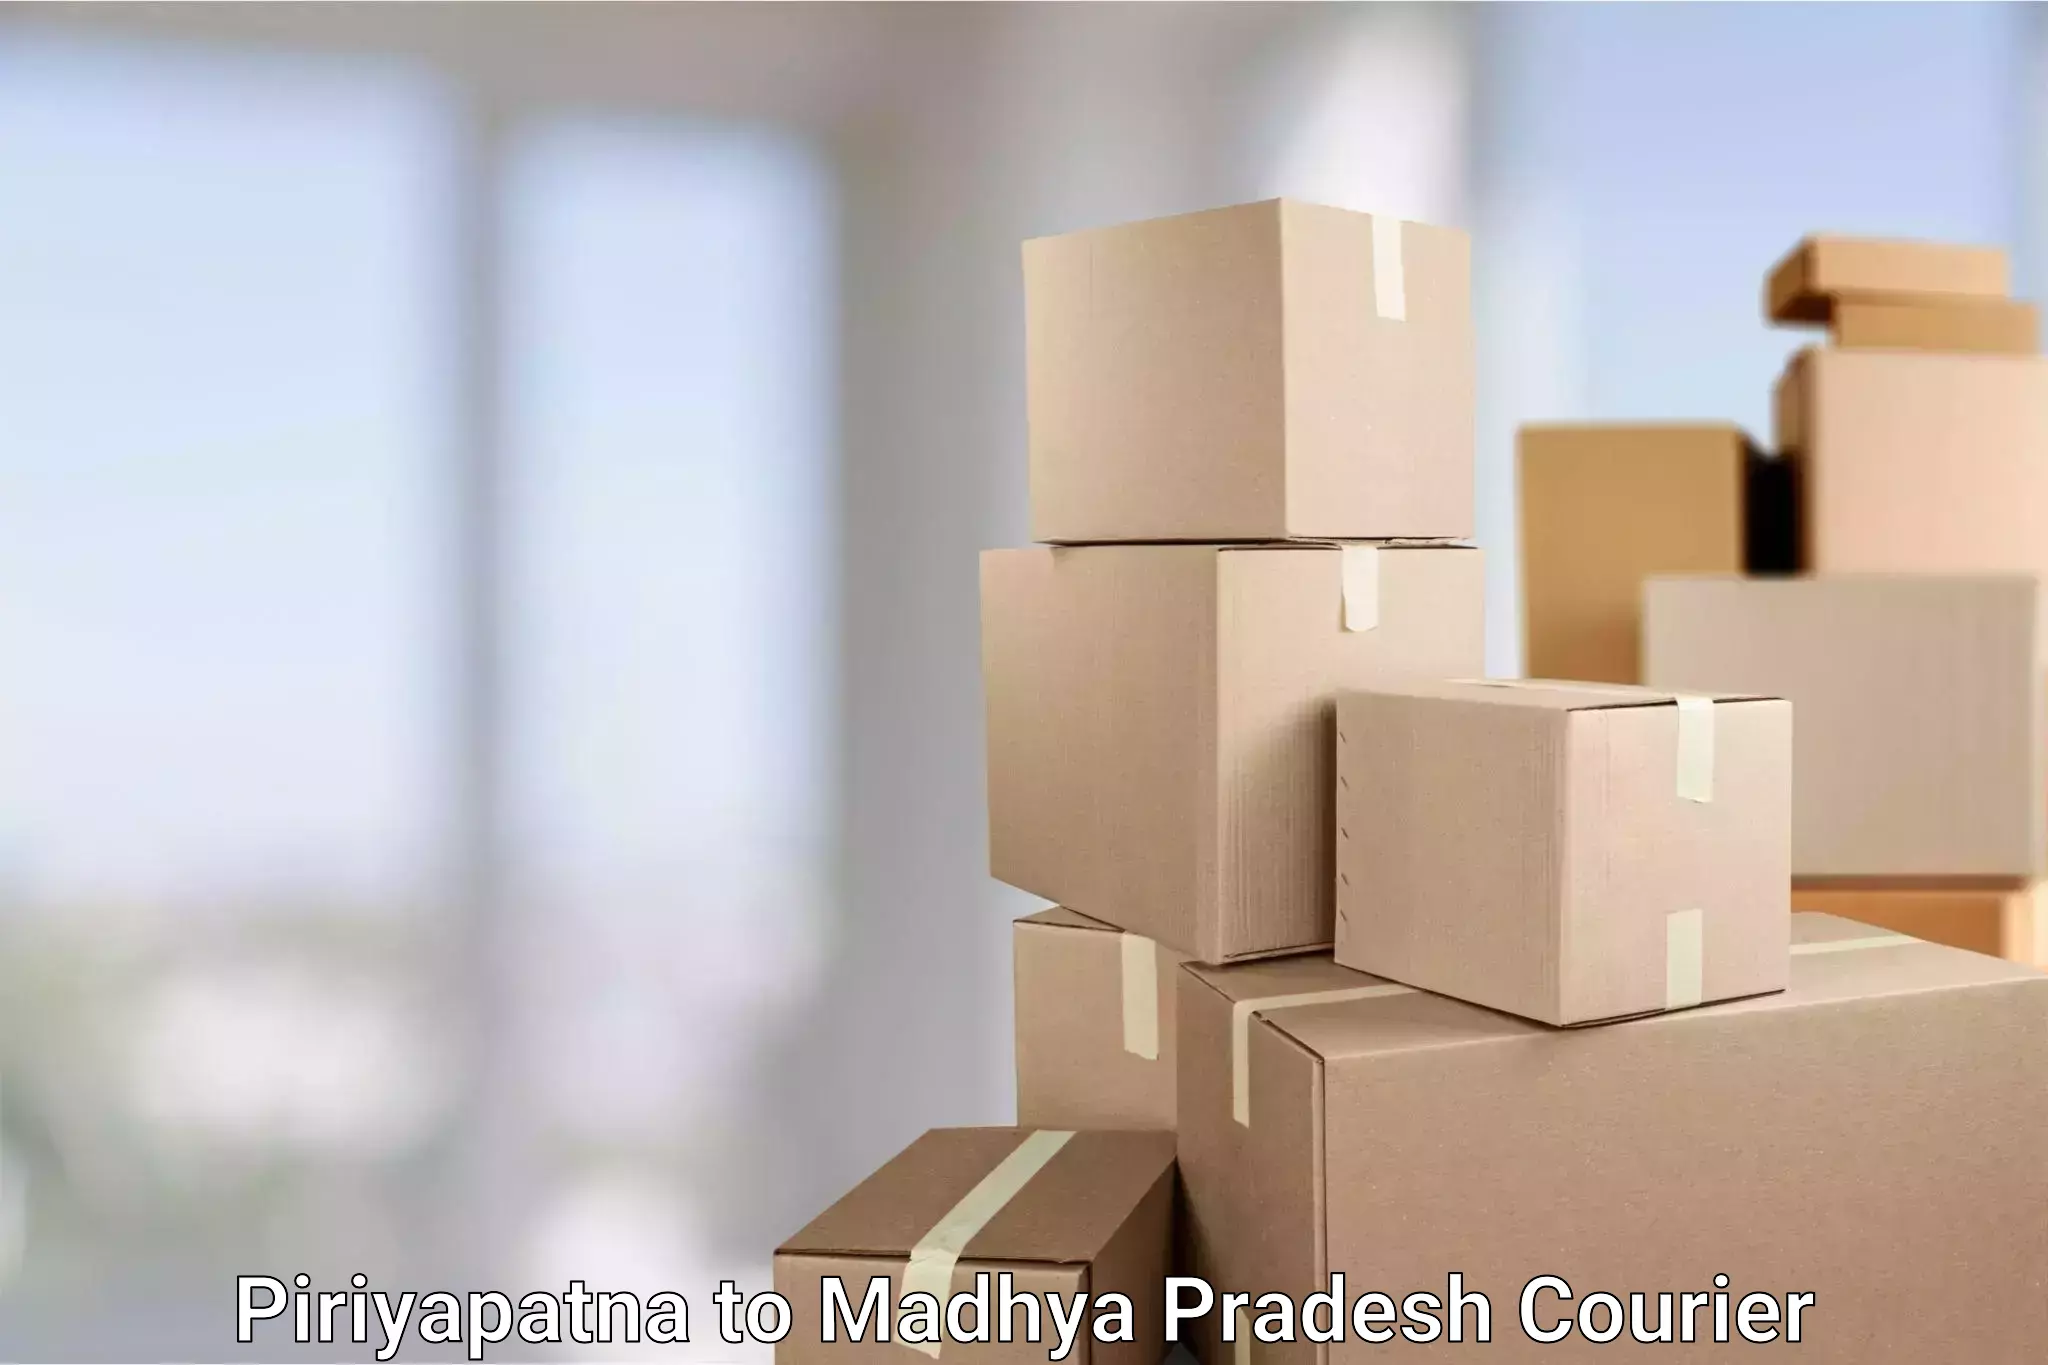 Professional parcel services in Piriyapatna to Gotegaon